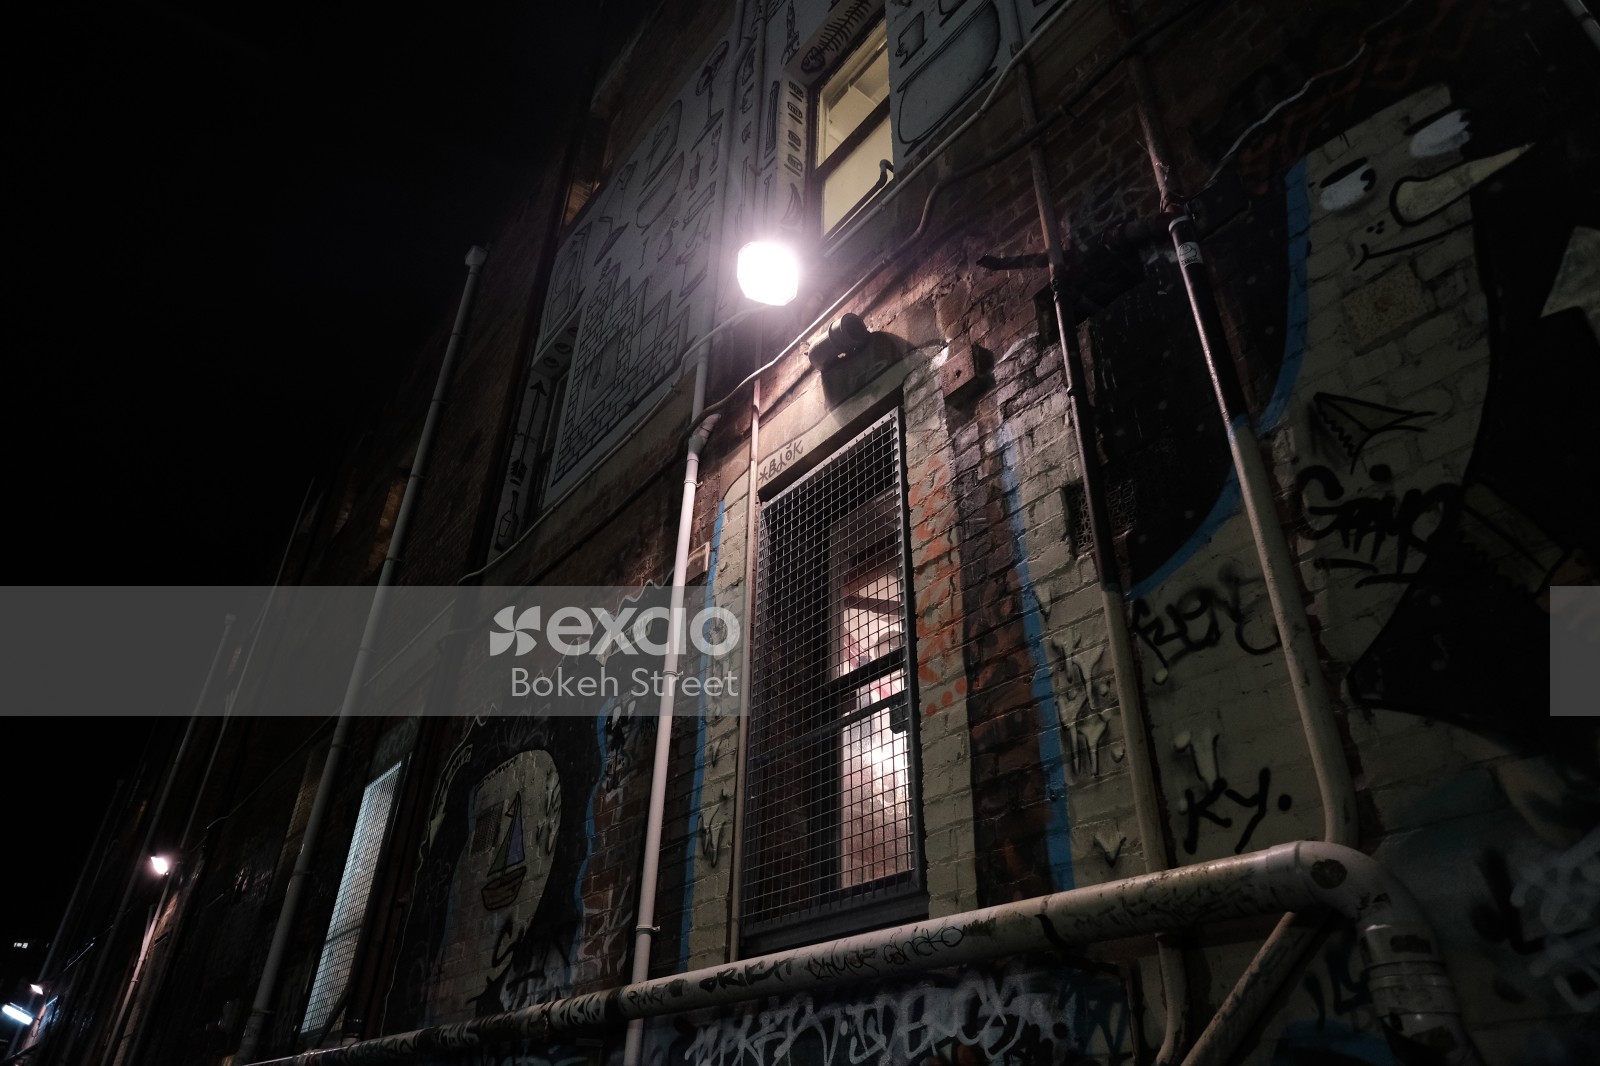 Graffitied building view at night